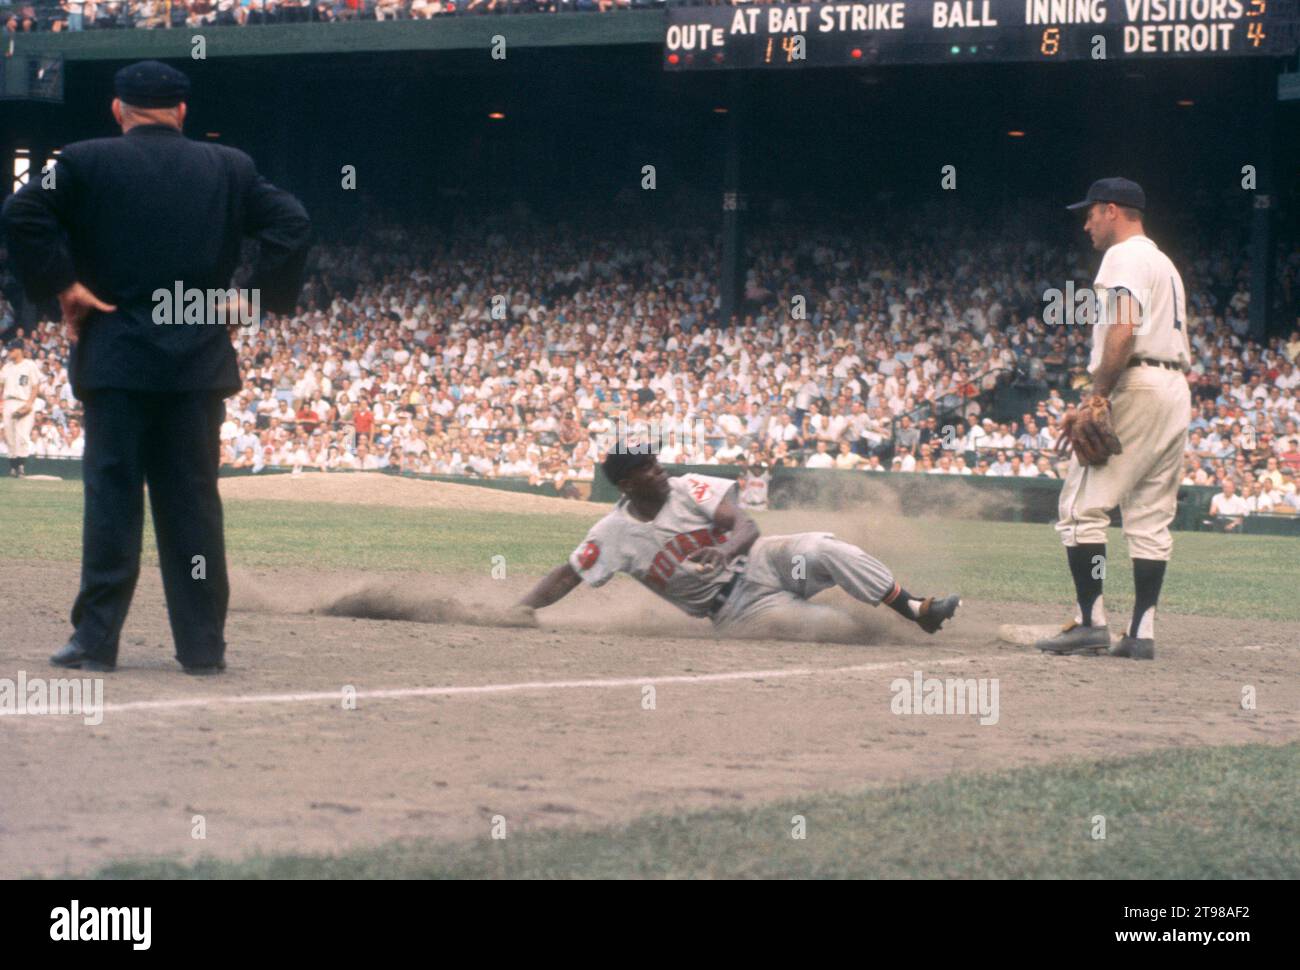 DETROIT, MI - JULY 5: Minnie Minoso #9 of the Cleveland Indians slides into third base as Eddie Yost #1 of the Detroit Tigers and umpire Bill Summers look on during an MLB game on July 5, 1959 at Briggs Stadium in Detroit, Michigan. (Photo by Hy Peskin) *** Local Caption *** Minnie Minoso;Eddie Yost;Bill Summers Stock Photo